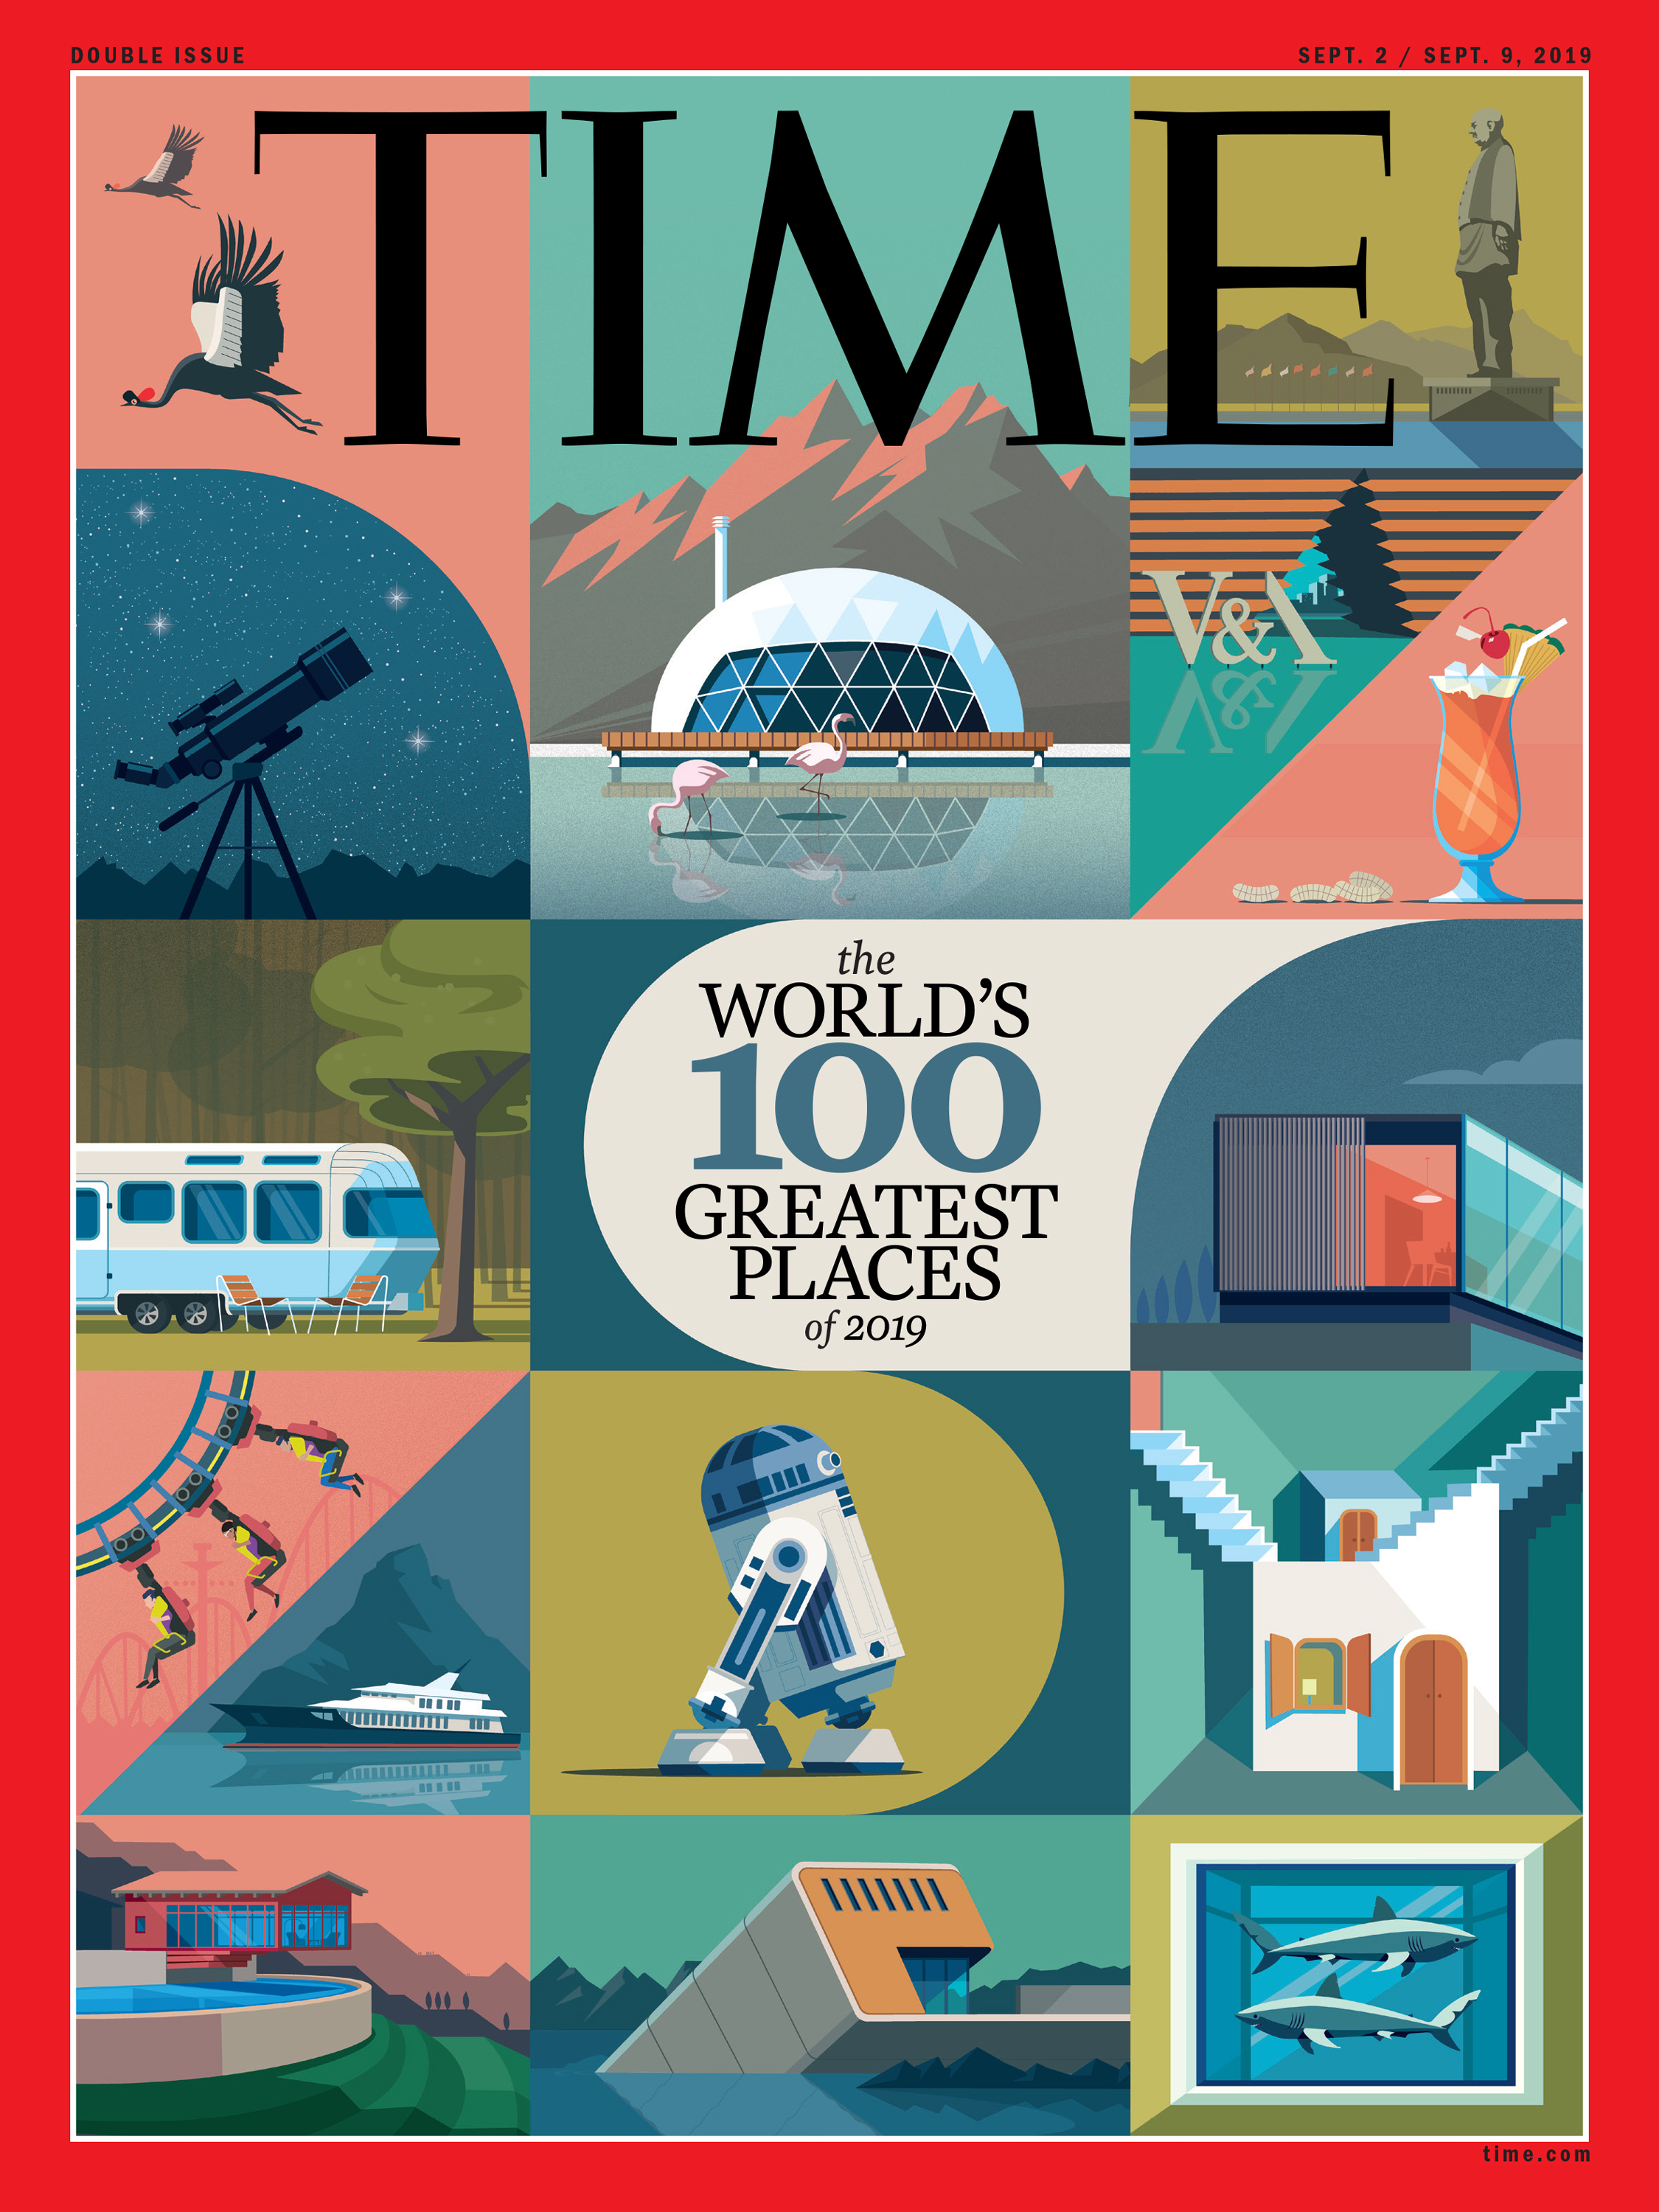 The World's 100 Greatest Places